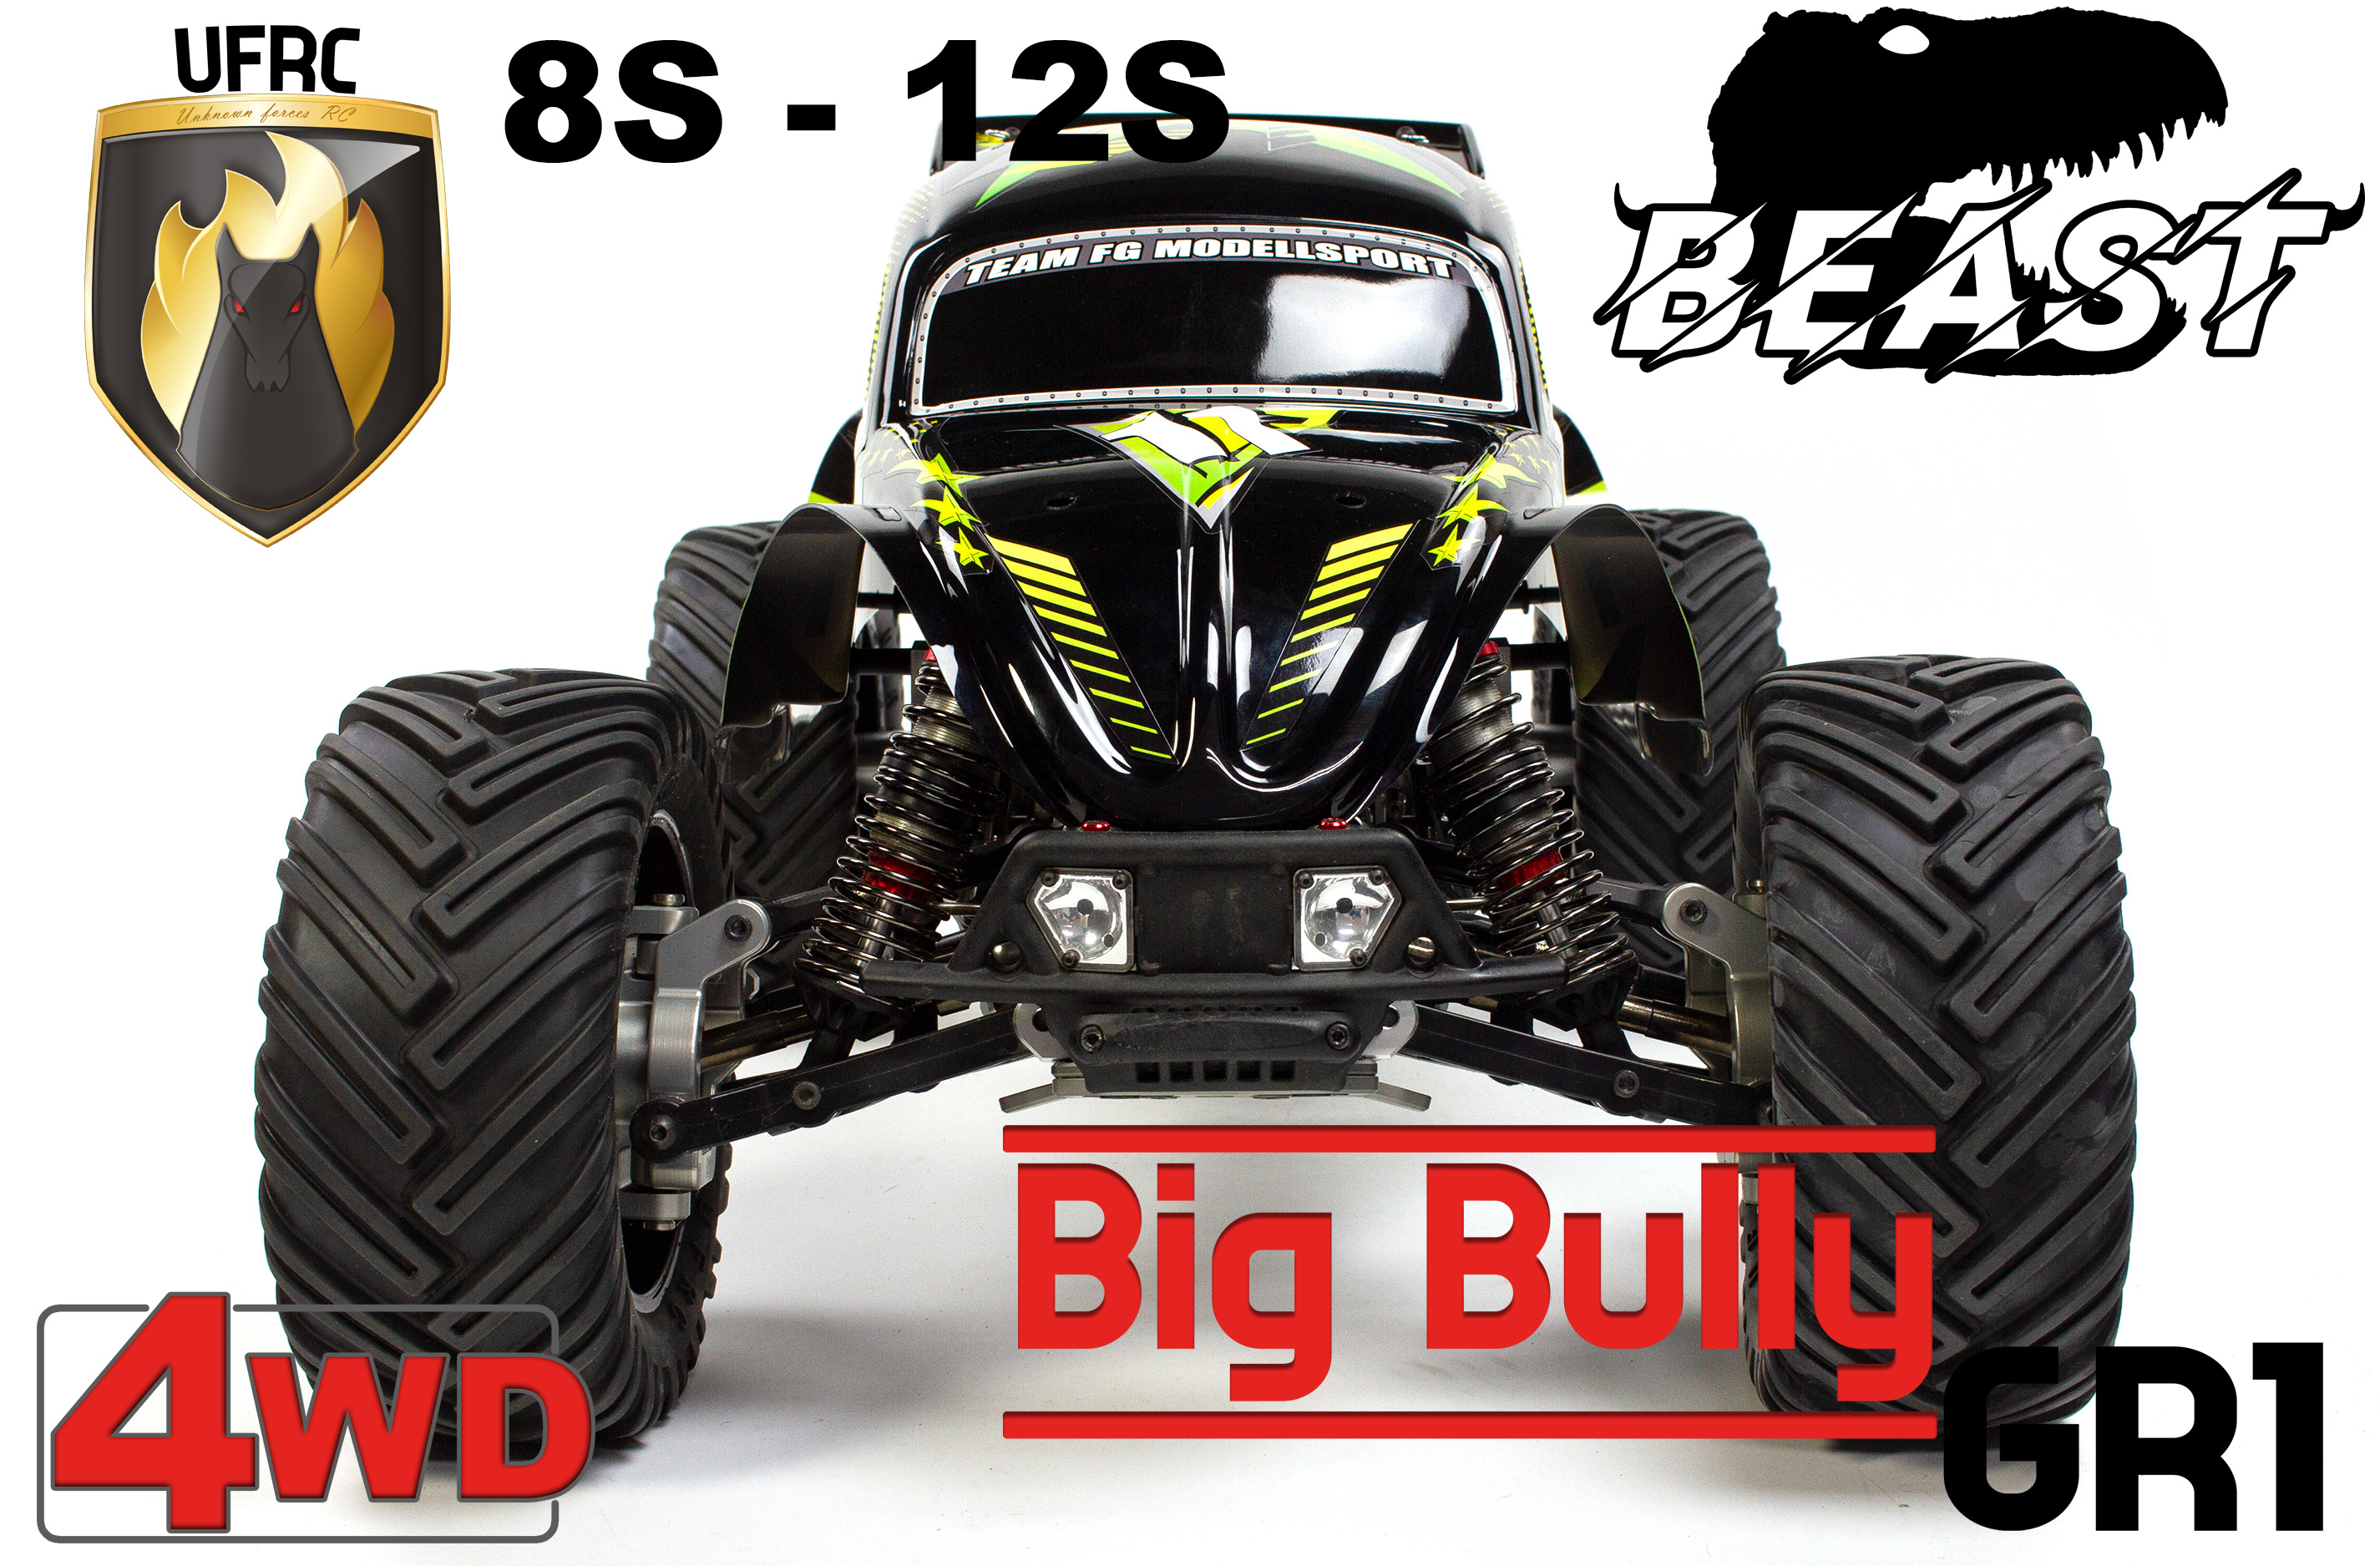 UFRC Big Bully GR1 4WD 1:5 Brushless Buggy with painted Body Shell